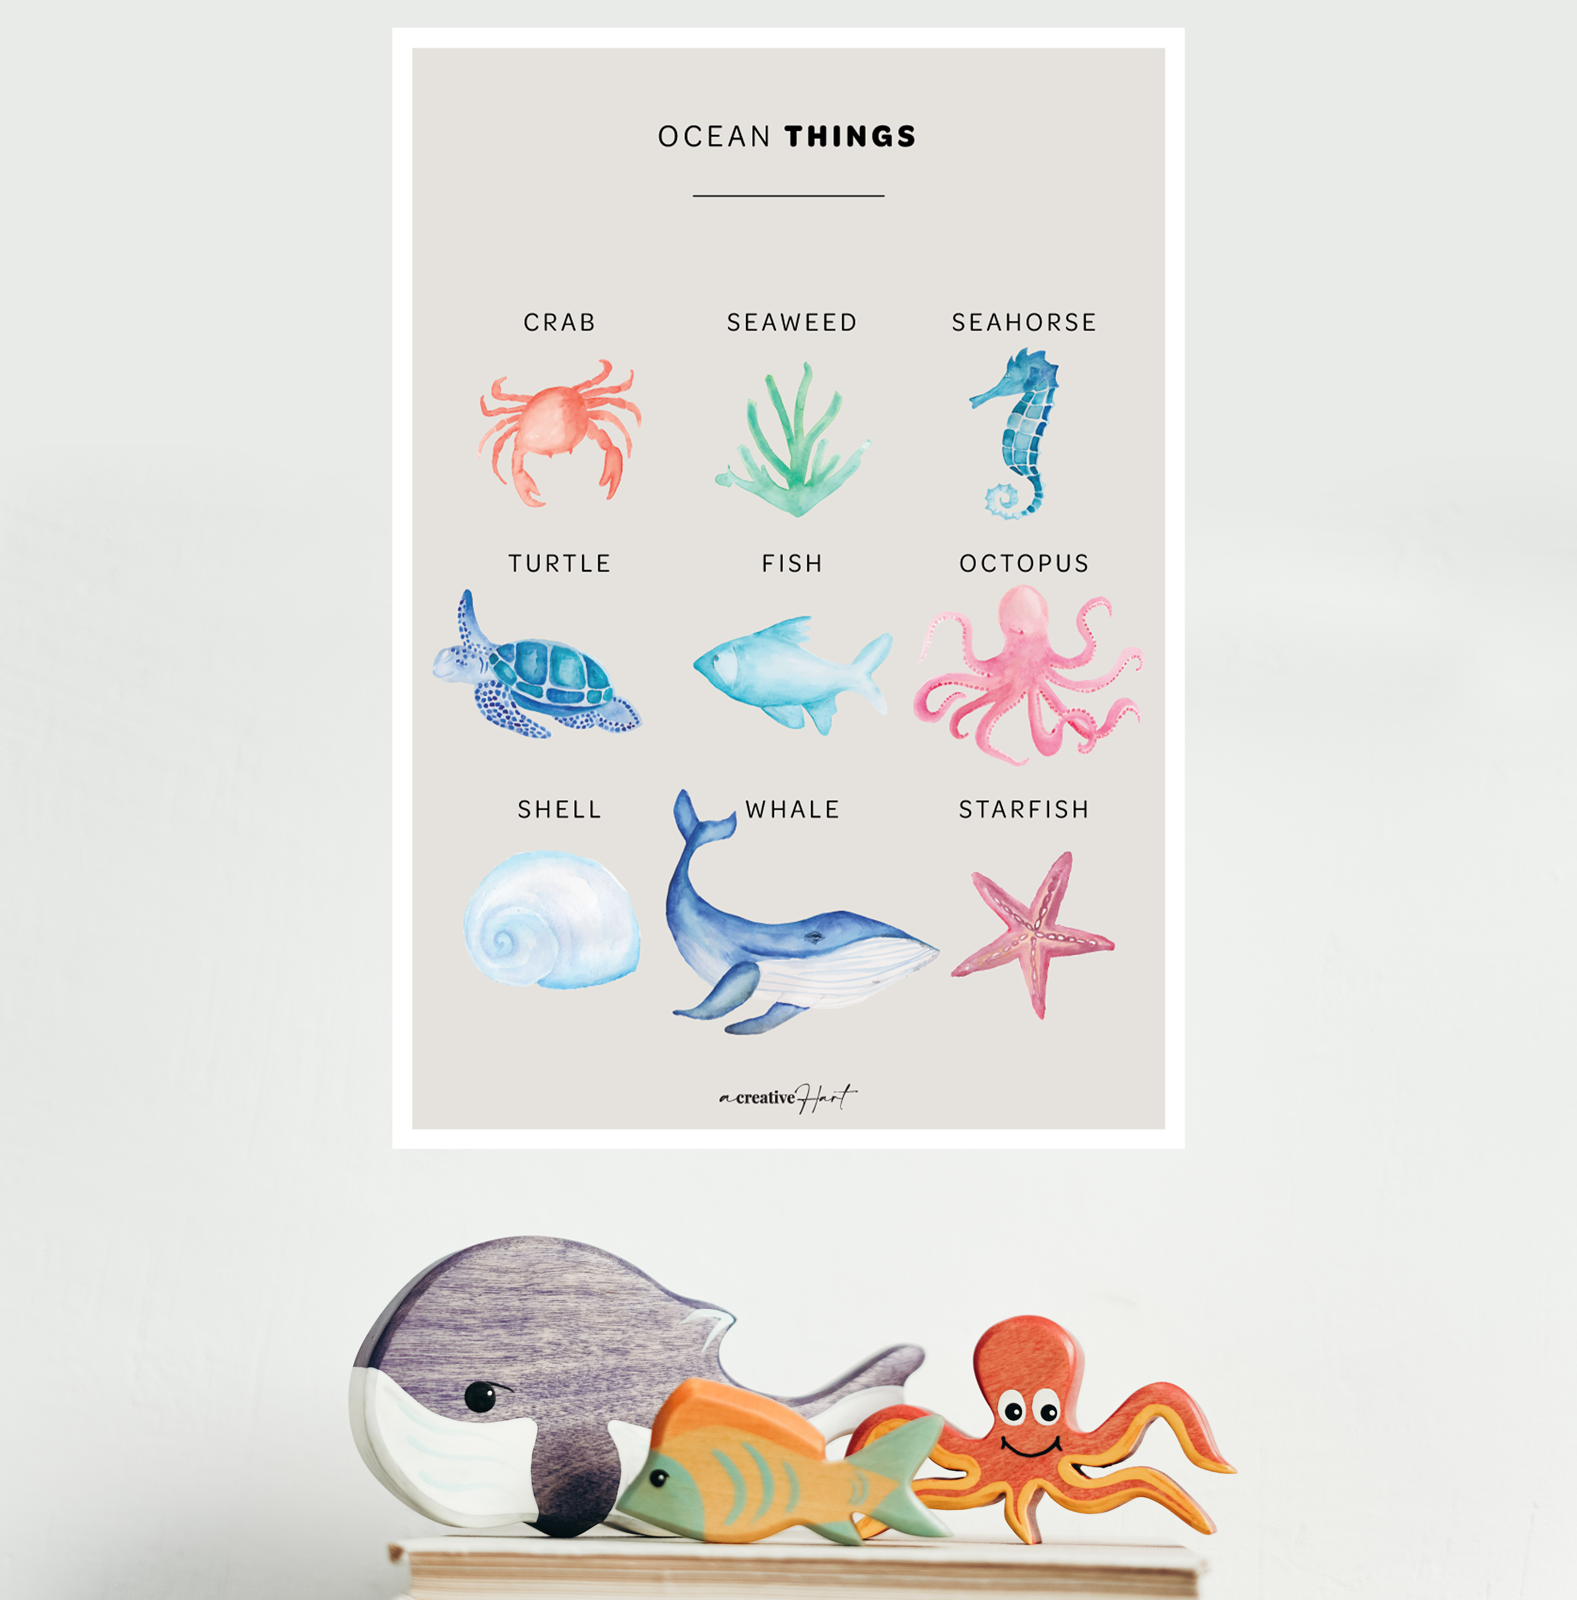 Ocean Things Educational Under the Sea Fabric Wall Decal